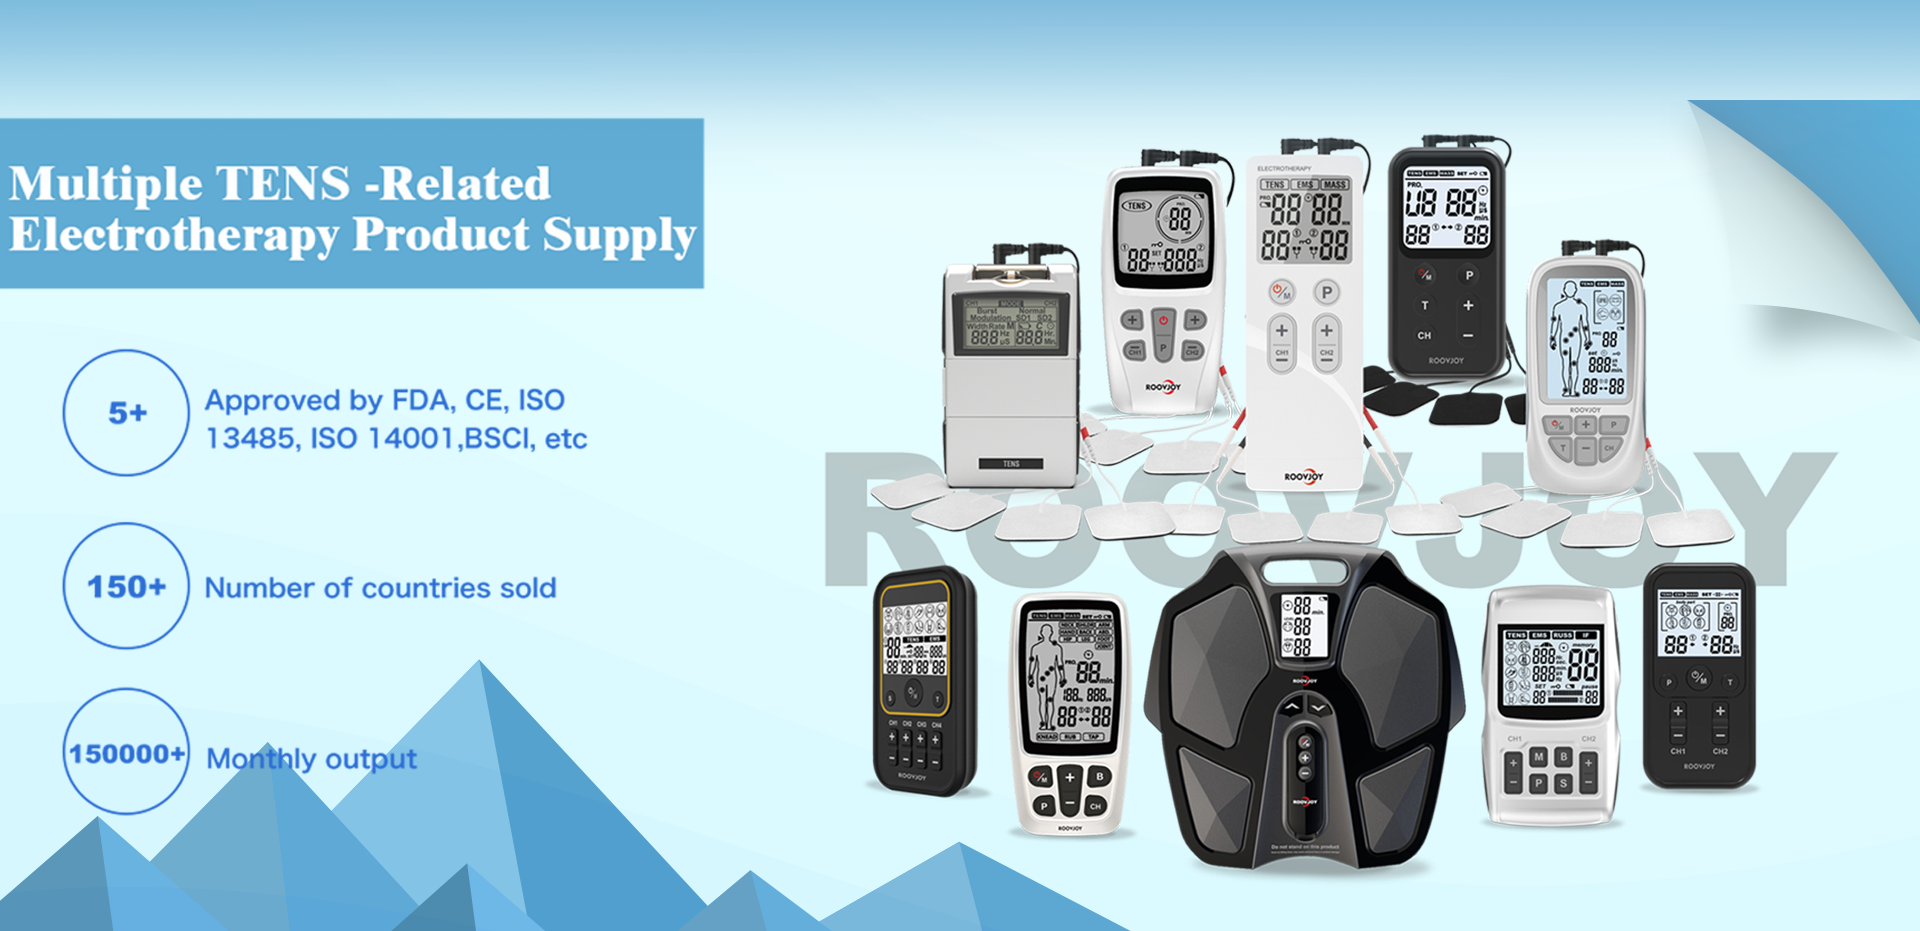 Multiple TENS Related Electrotherapy Product Supply